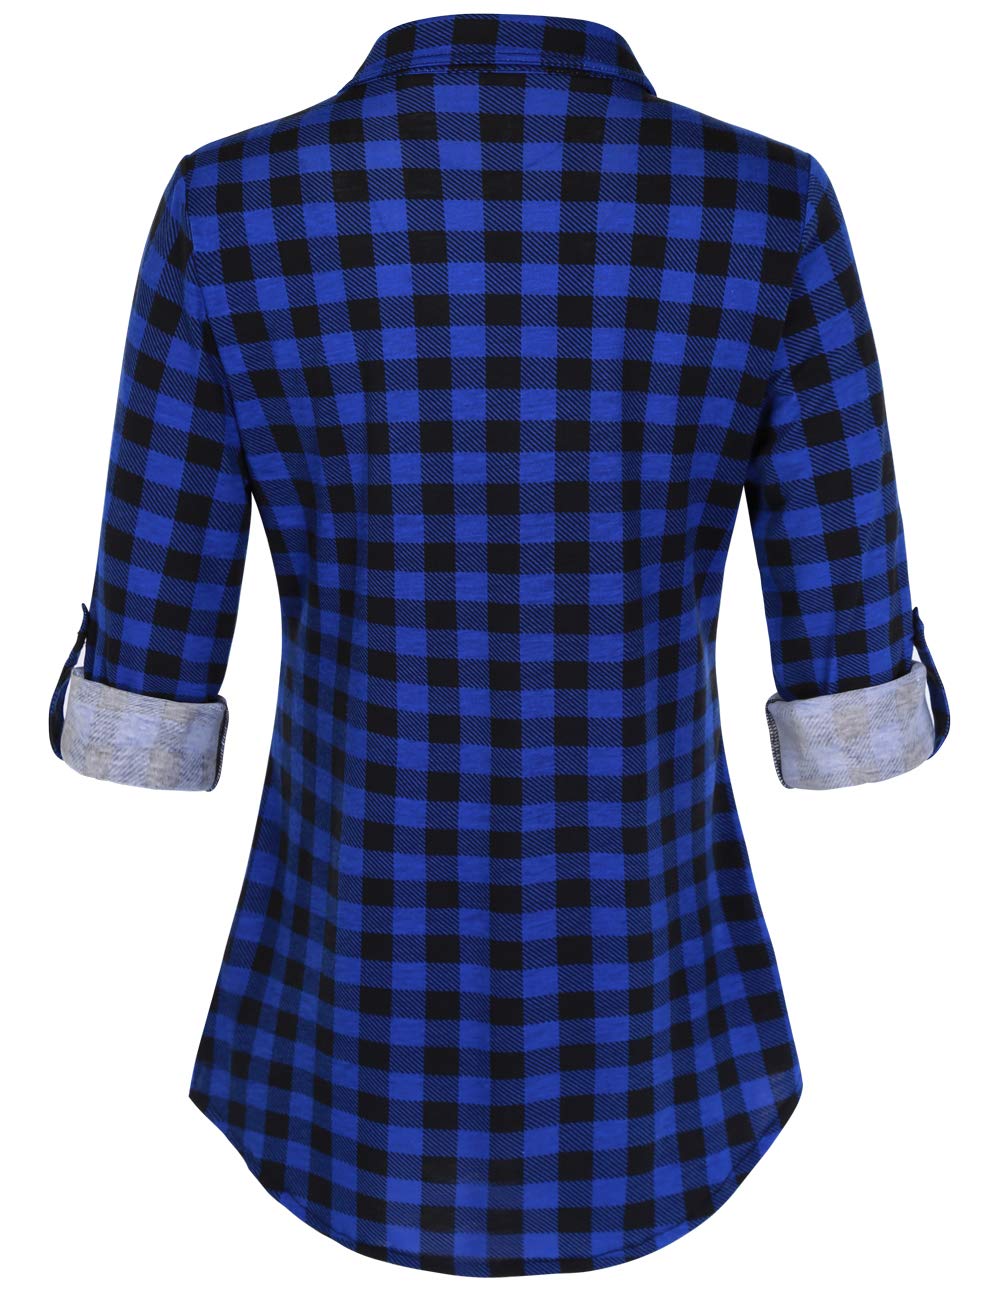 DJT Roll Up Long Sleeve Vibrant Blue Women’s Collared Button Down Plaid Shirt